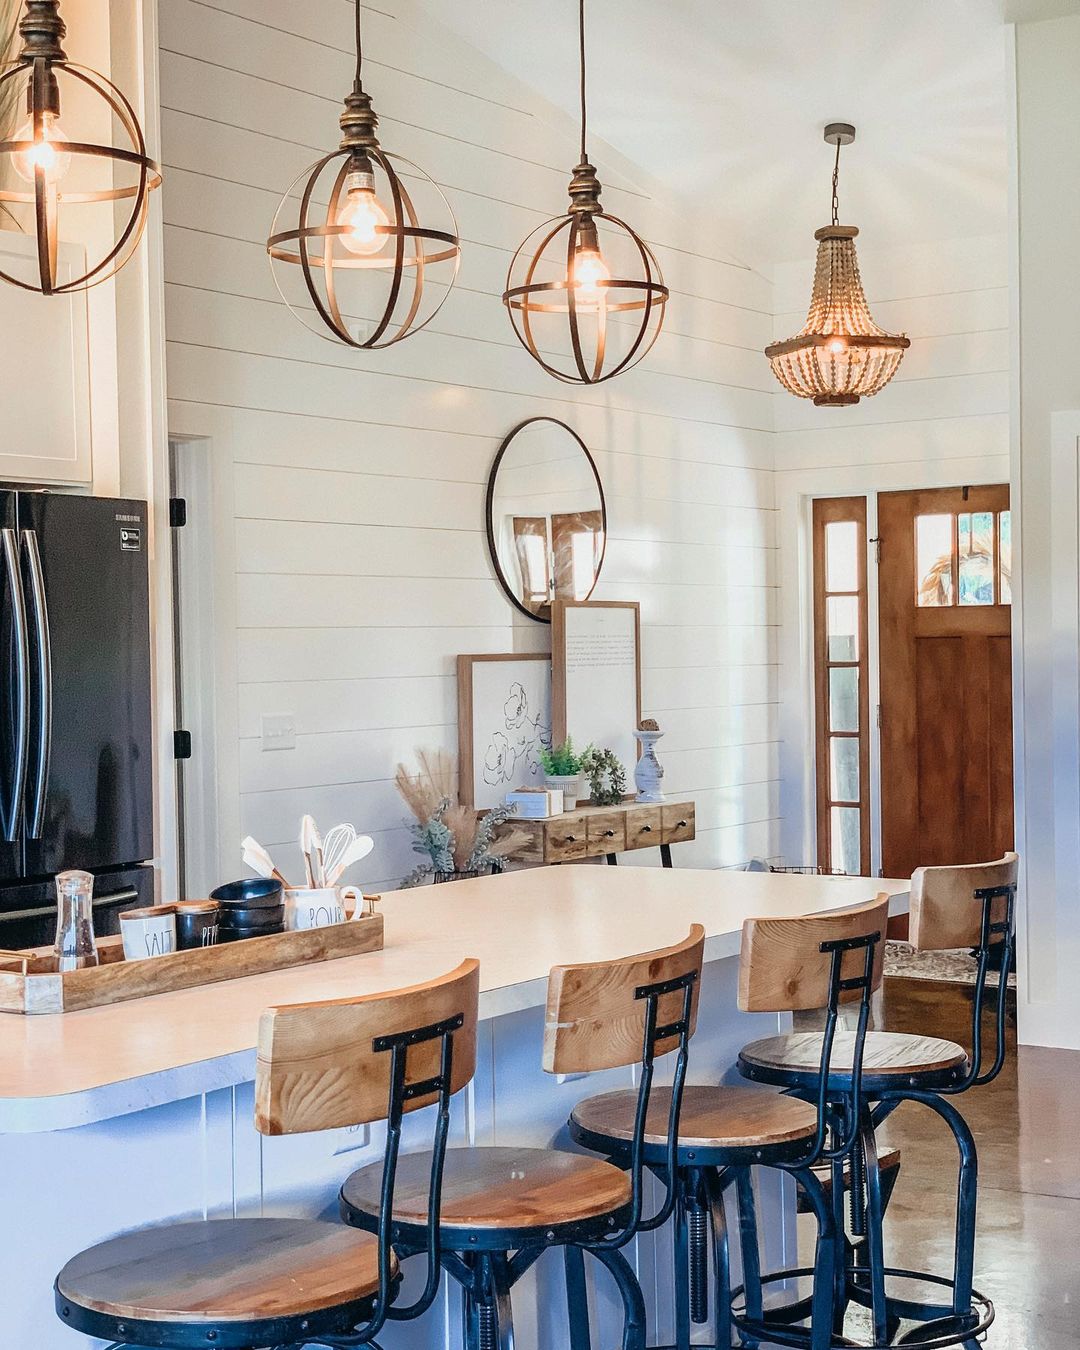 Updated Modern Farmhouse Kitchen and Entryway. Photo by Instagram user @lifeonheritagehill